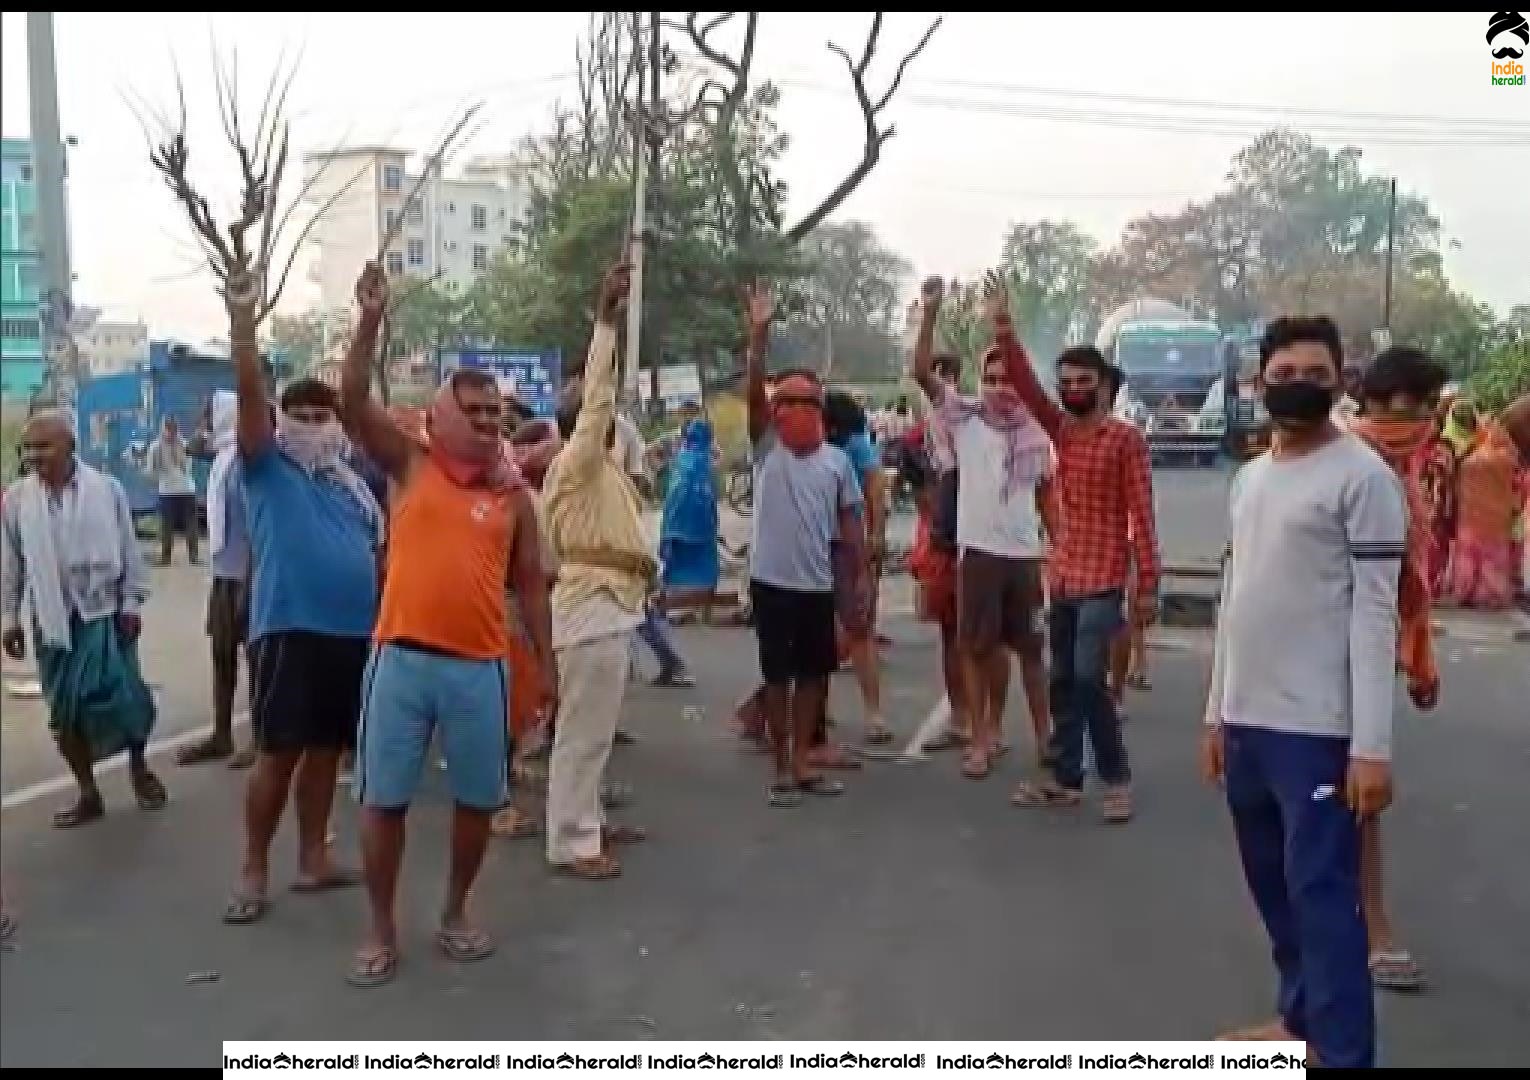 Vegetable farmers stage a protest in Bihar Sharif area due to Police harassment under the name of Corona Lockdown